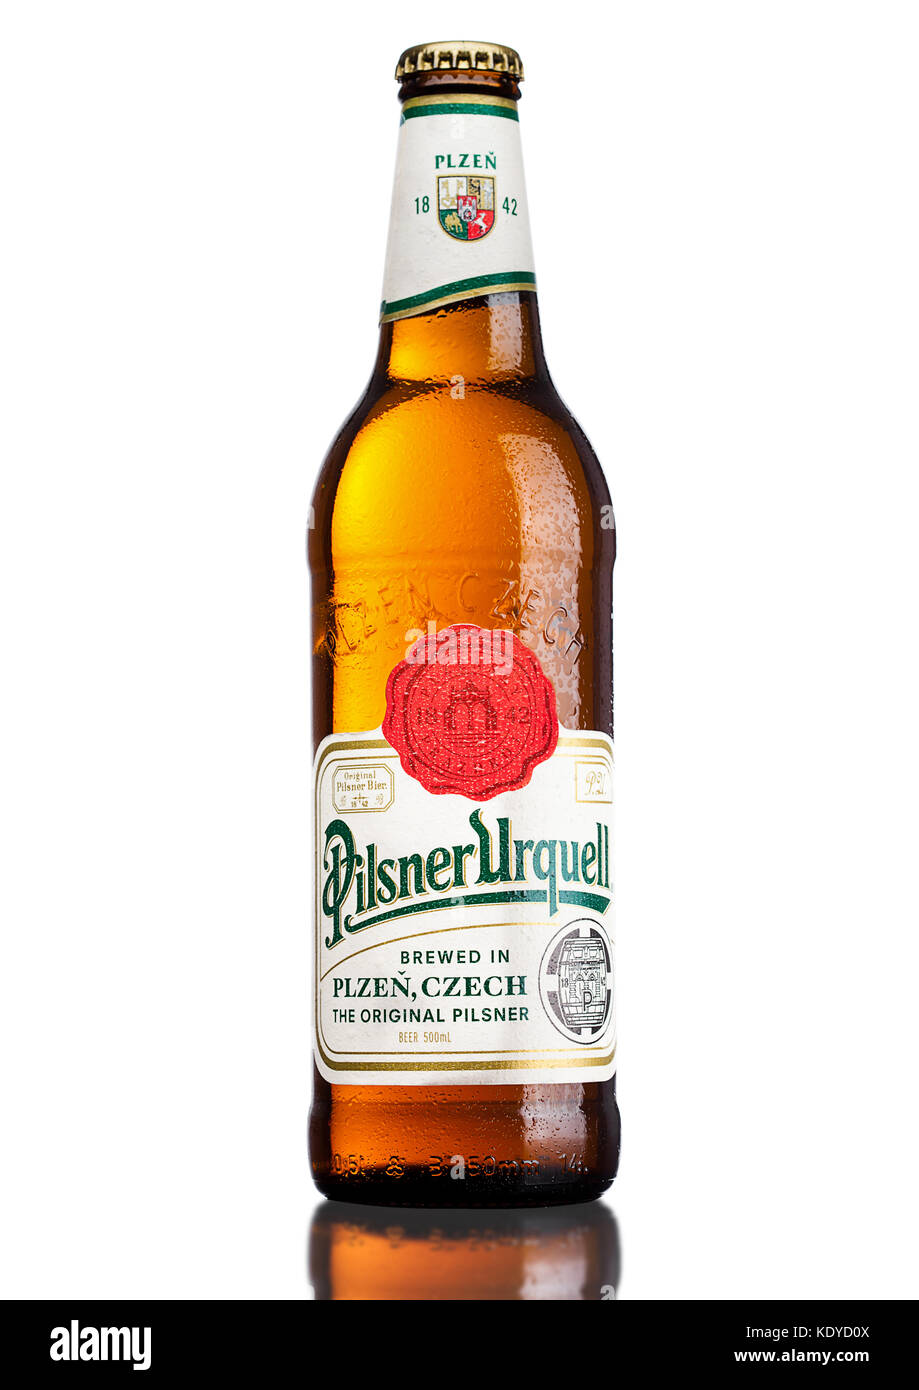 LONDON,UK - MARCH 21, 2017 :  Bottle of Pilsner Urquell beer on white background.It has been produced since 1842 in Pilsen, Czech Republic. Stock Photo